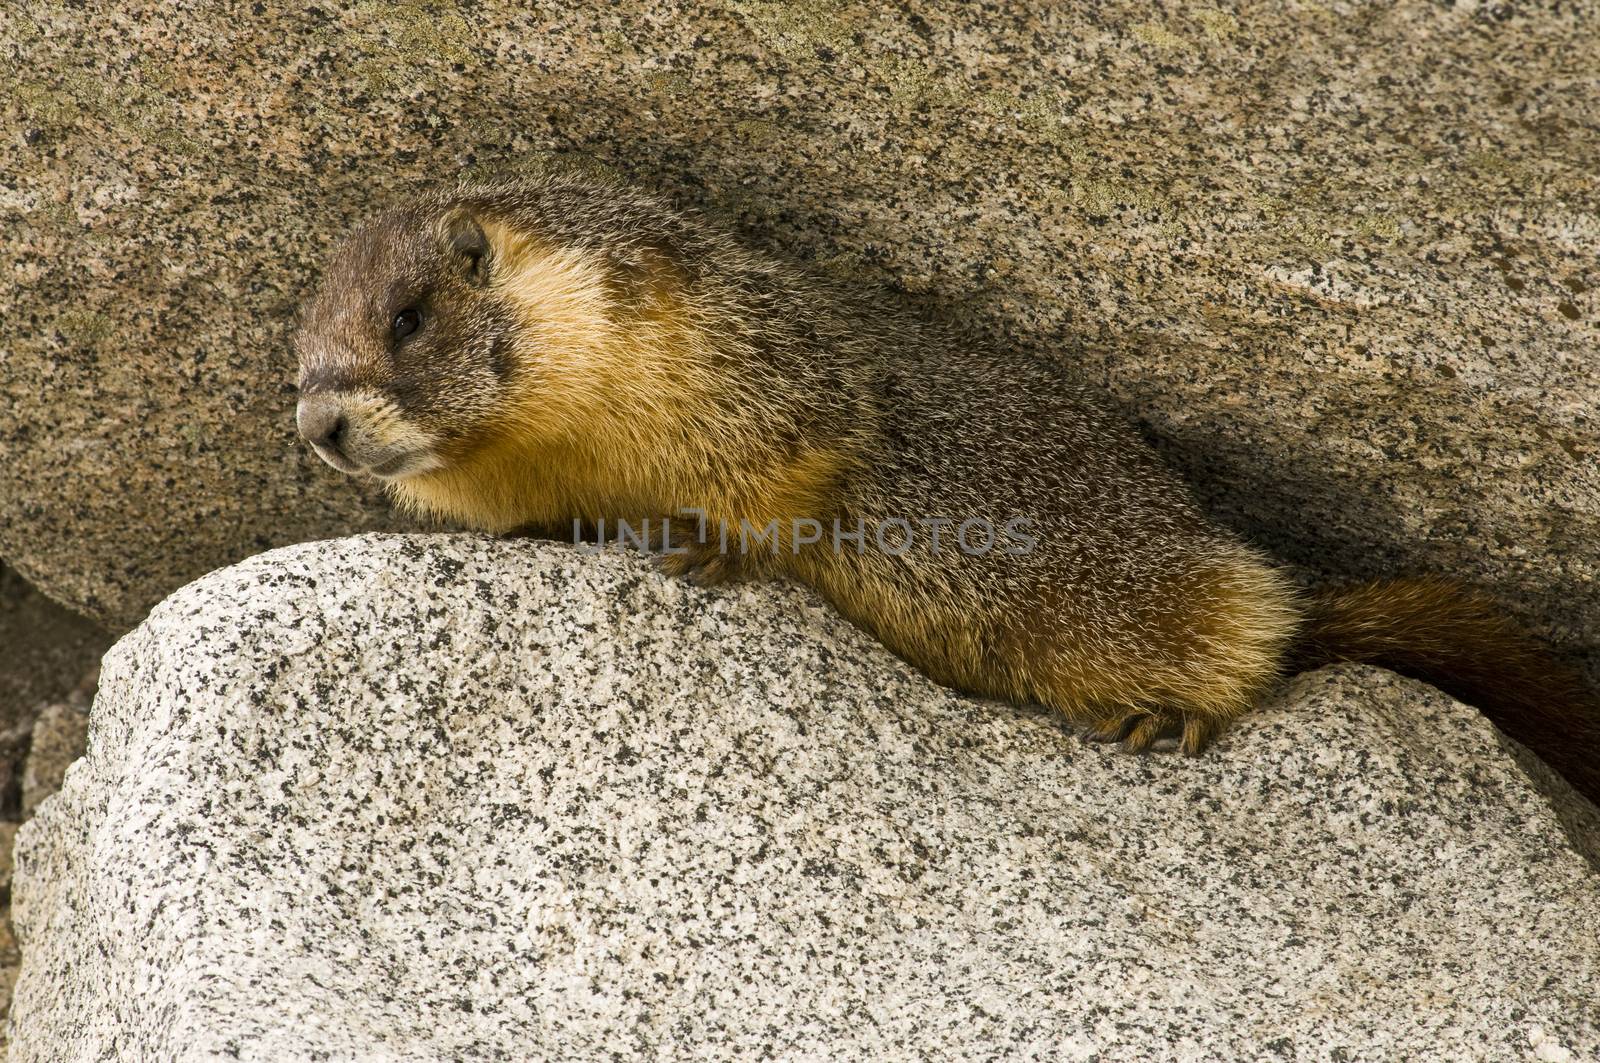 Wild Marmot (Marmota) near Tokopah falls located in the Lodgeple campground in the Sequoia National Park, CA. Native to mountainous regions of Europe, United States, and Canada.